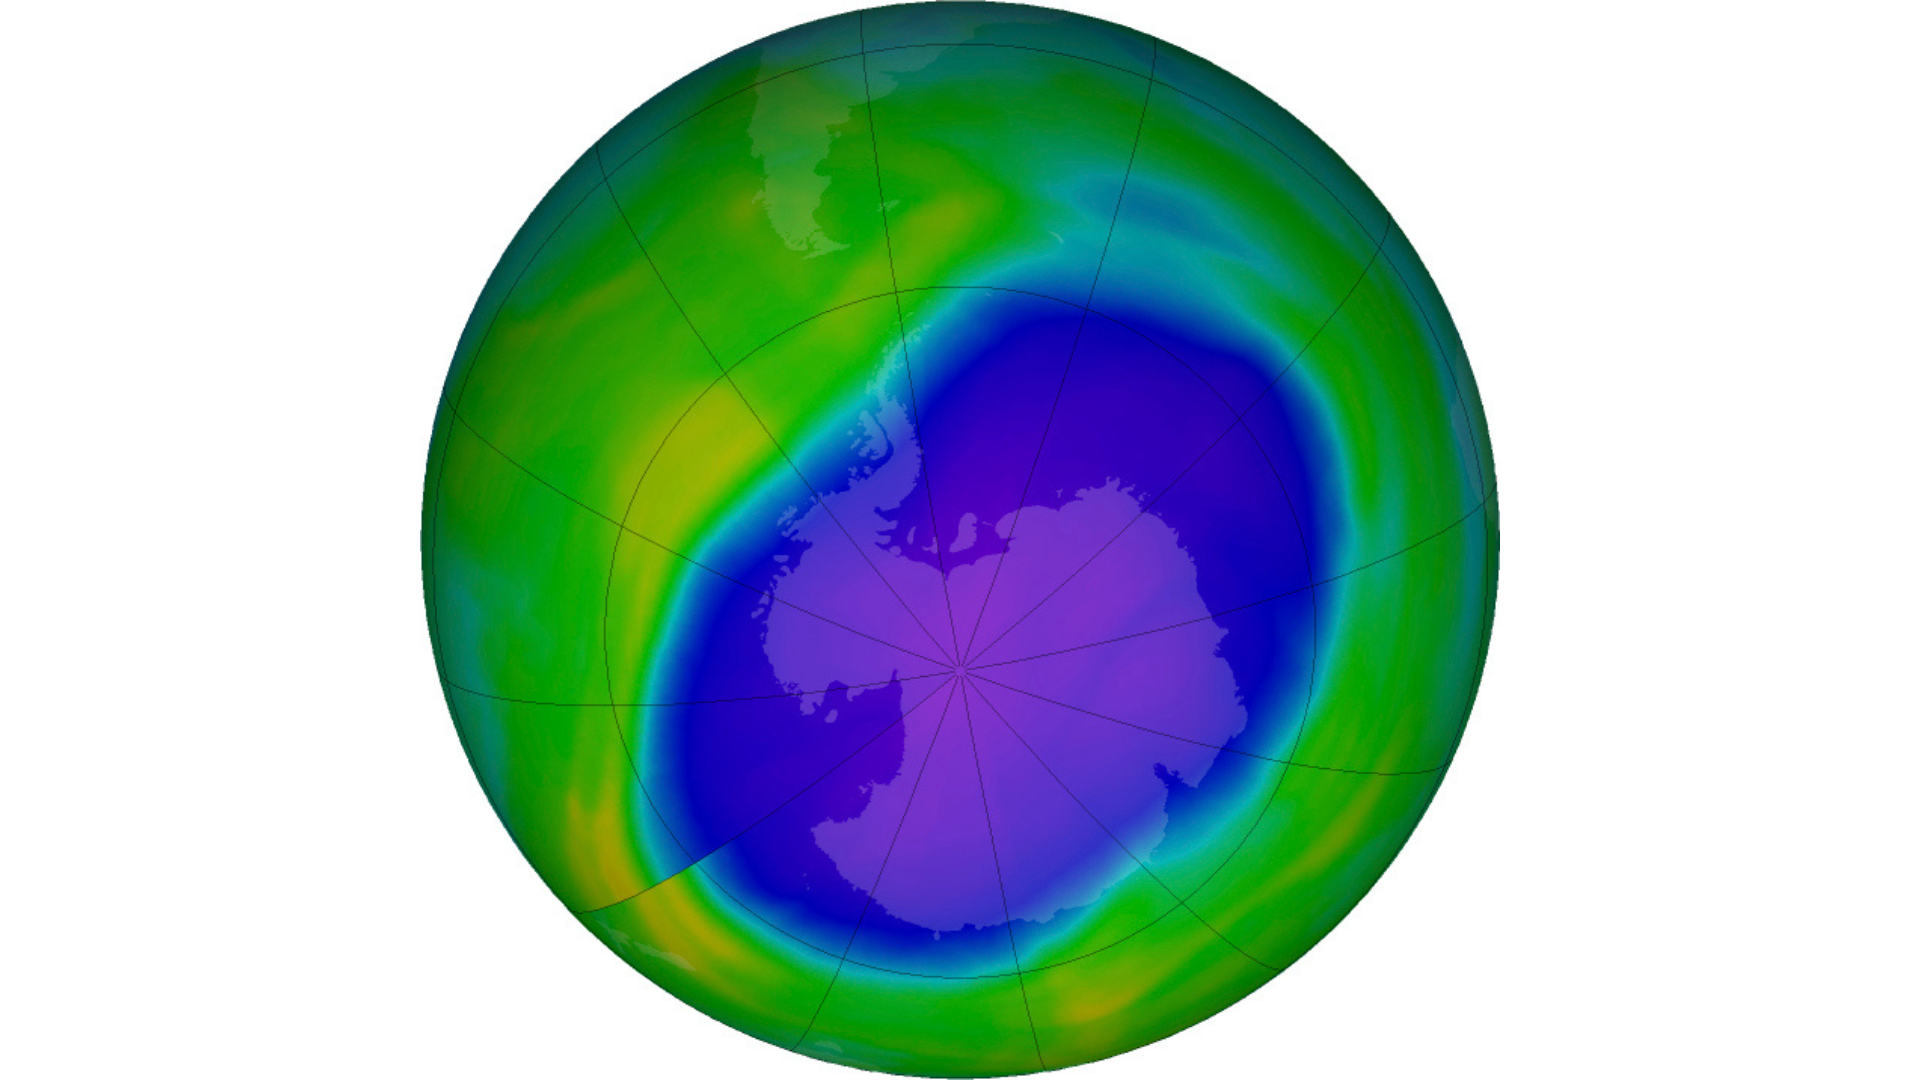 ozone hole pictured on diagram...